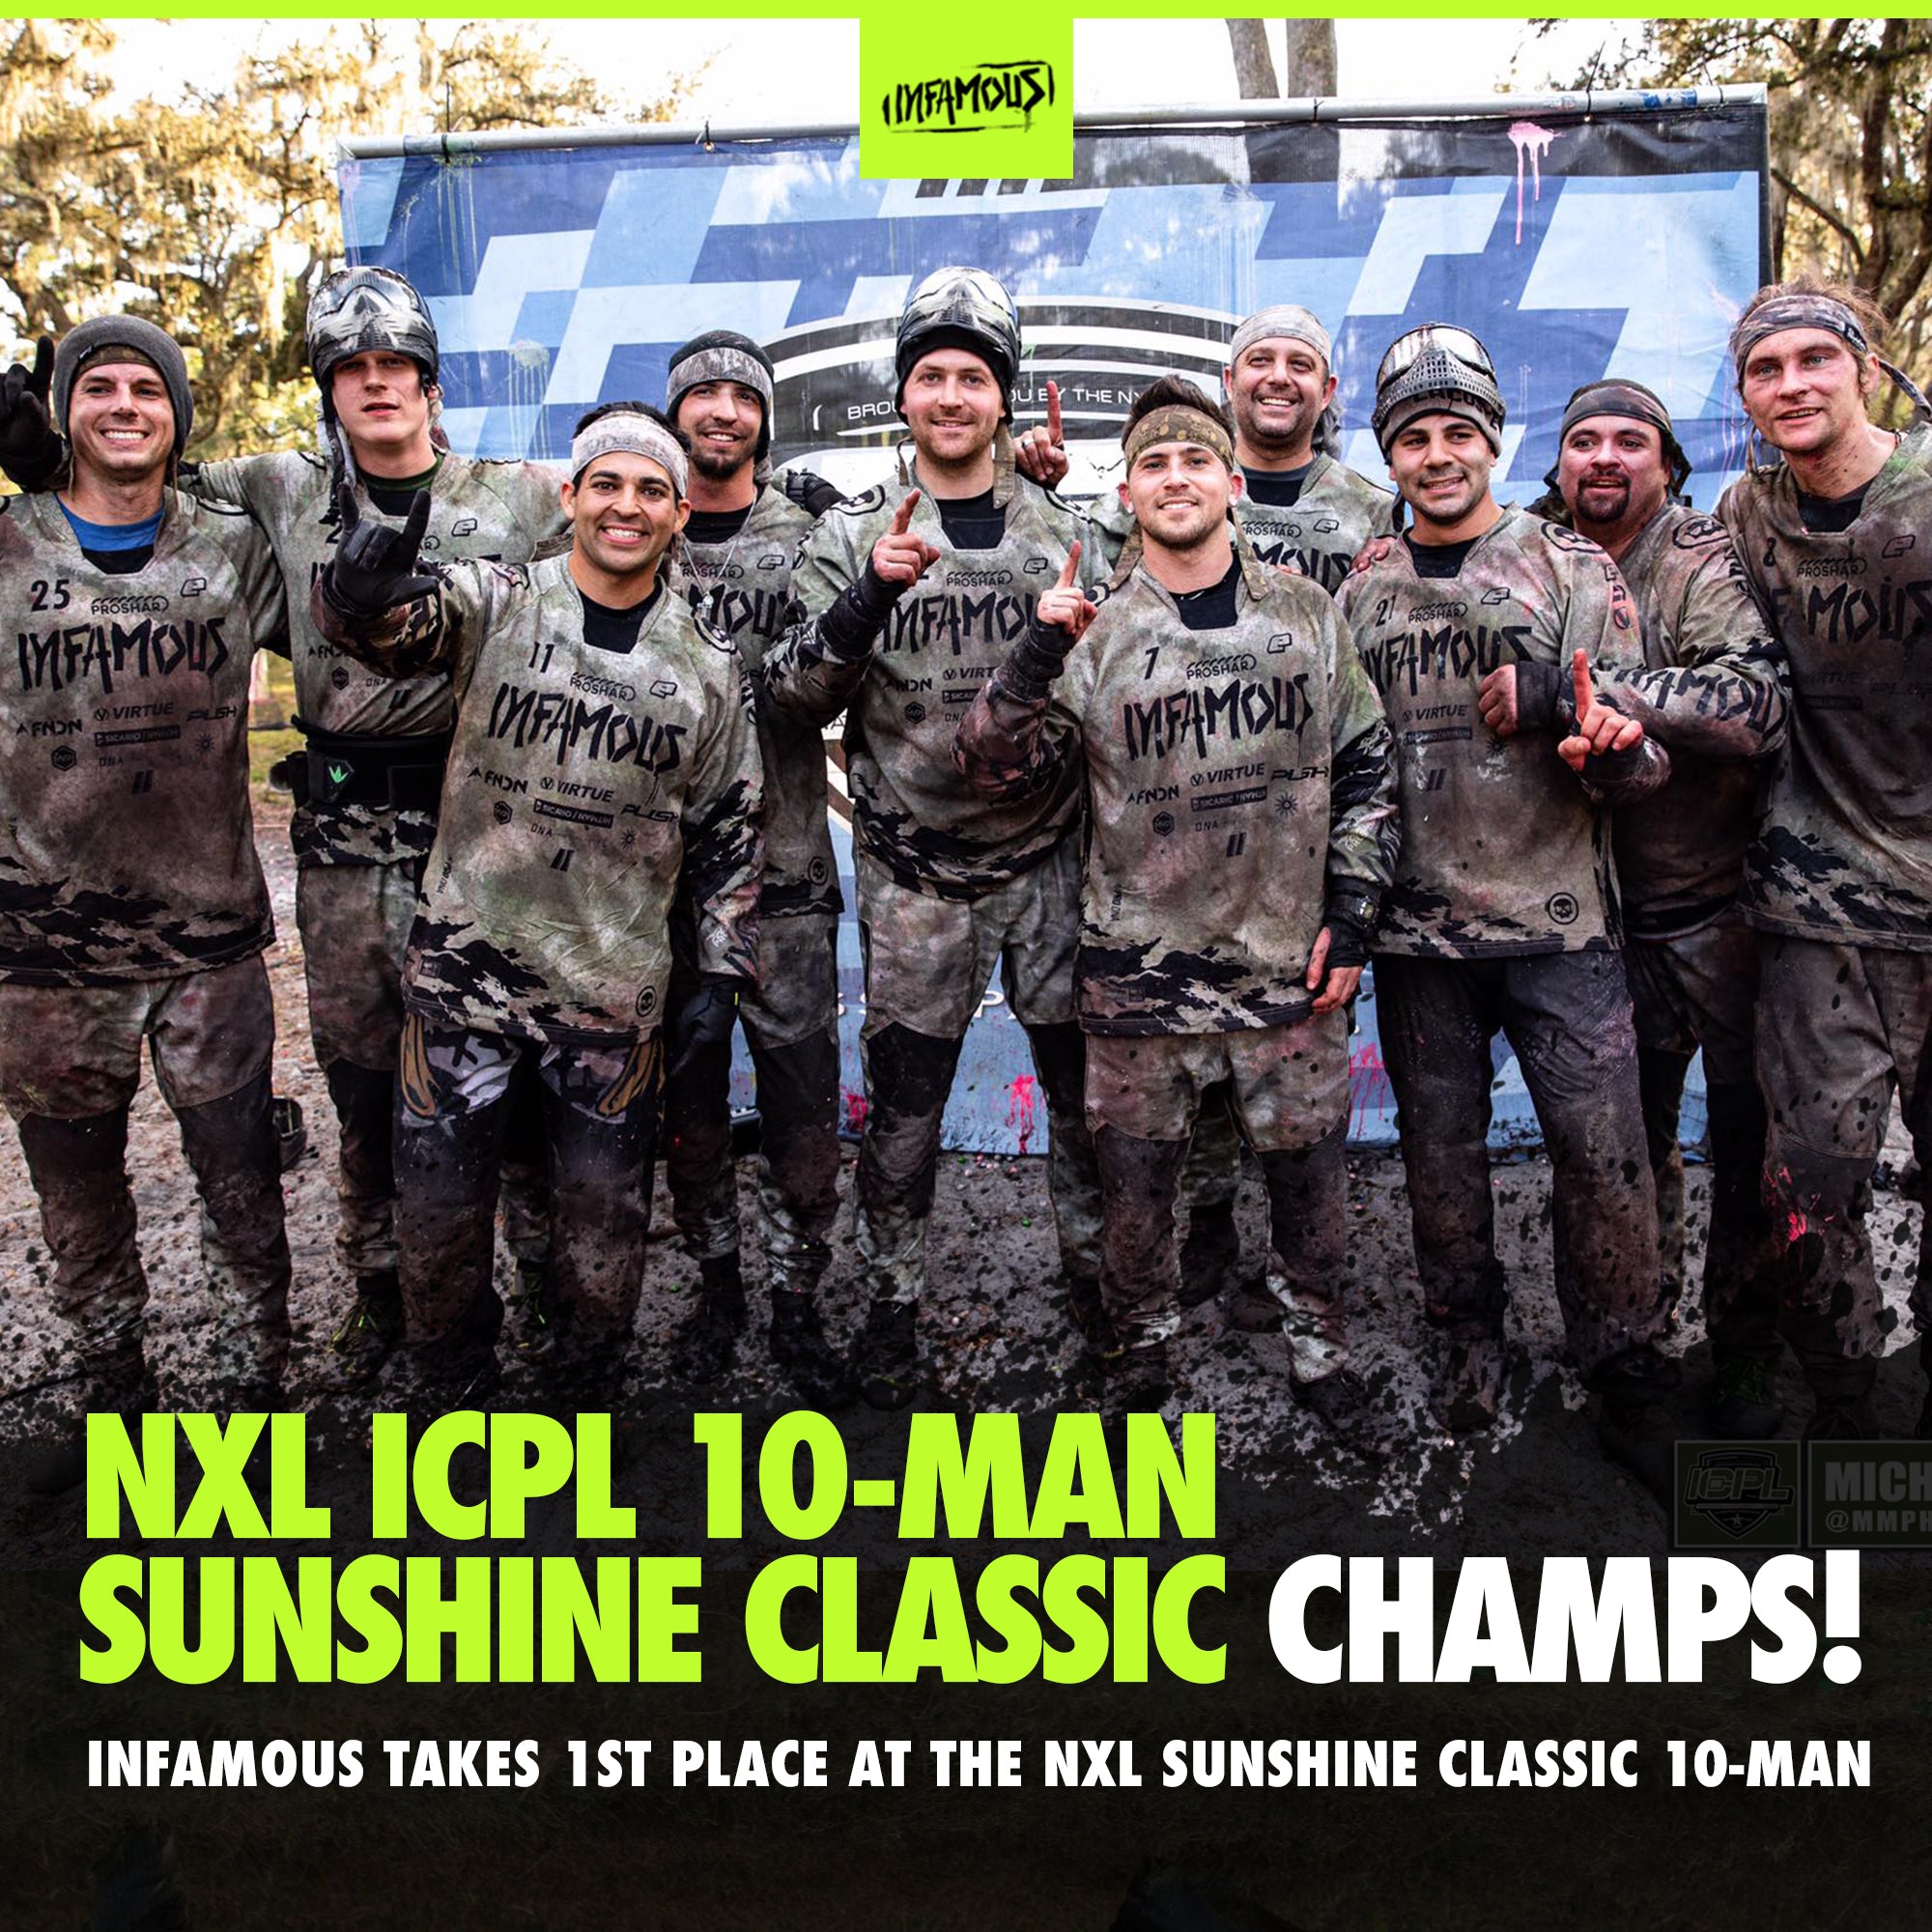 Infamous WINS the NXL Sunshine Classic